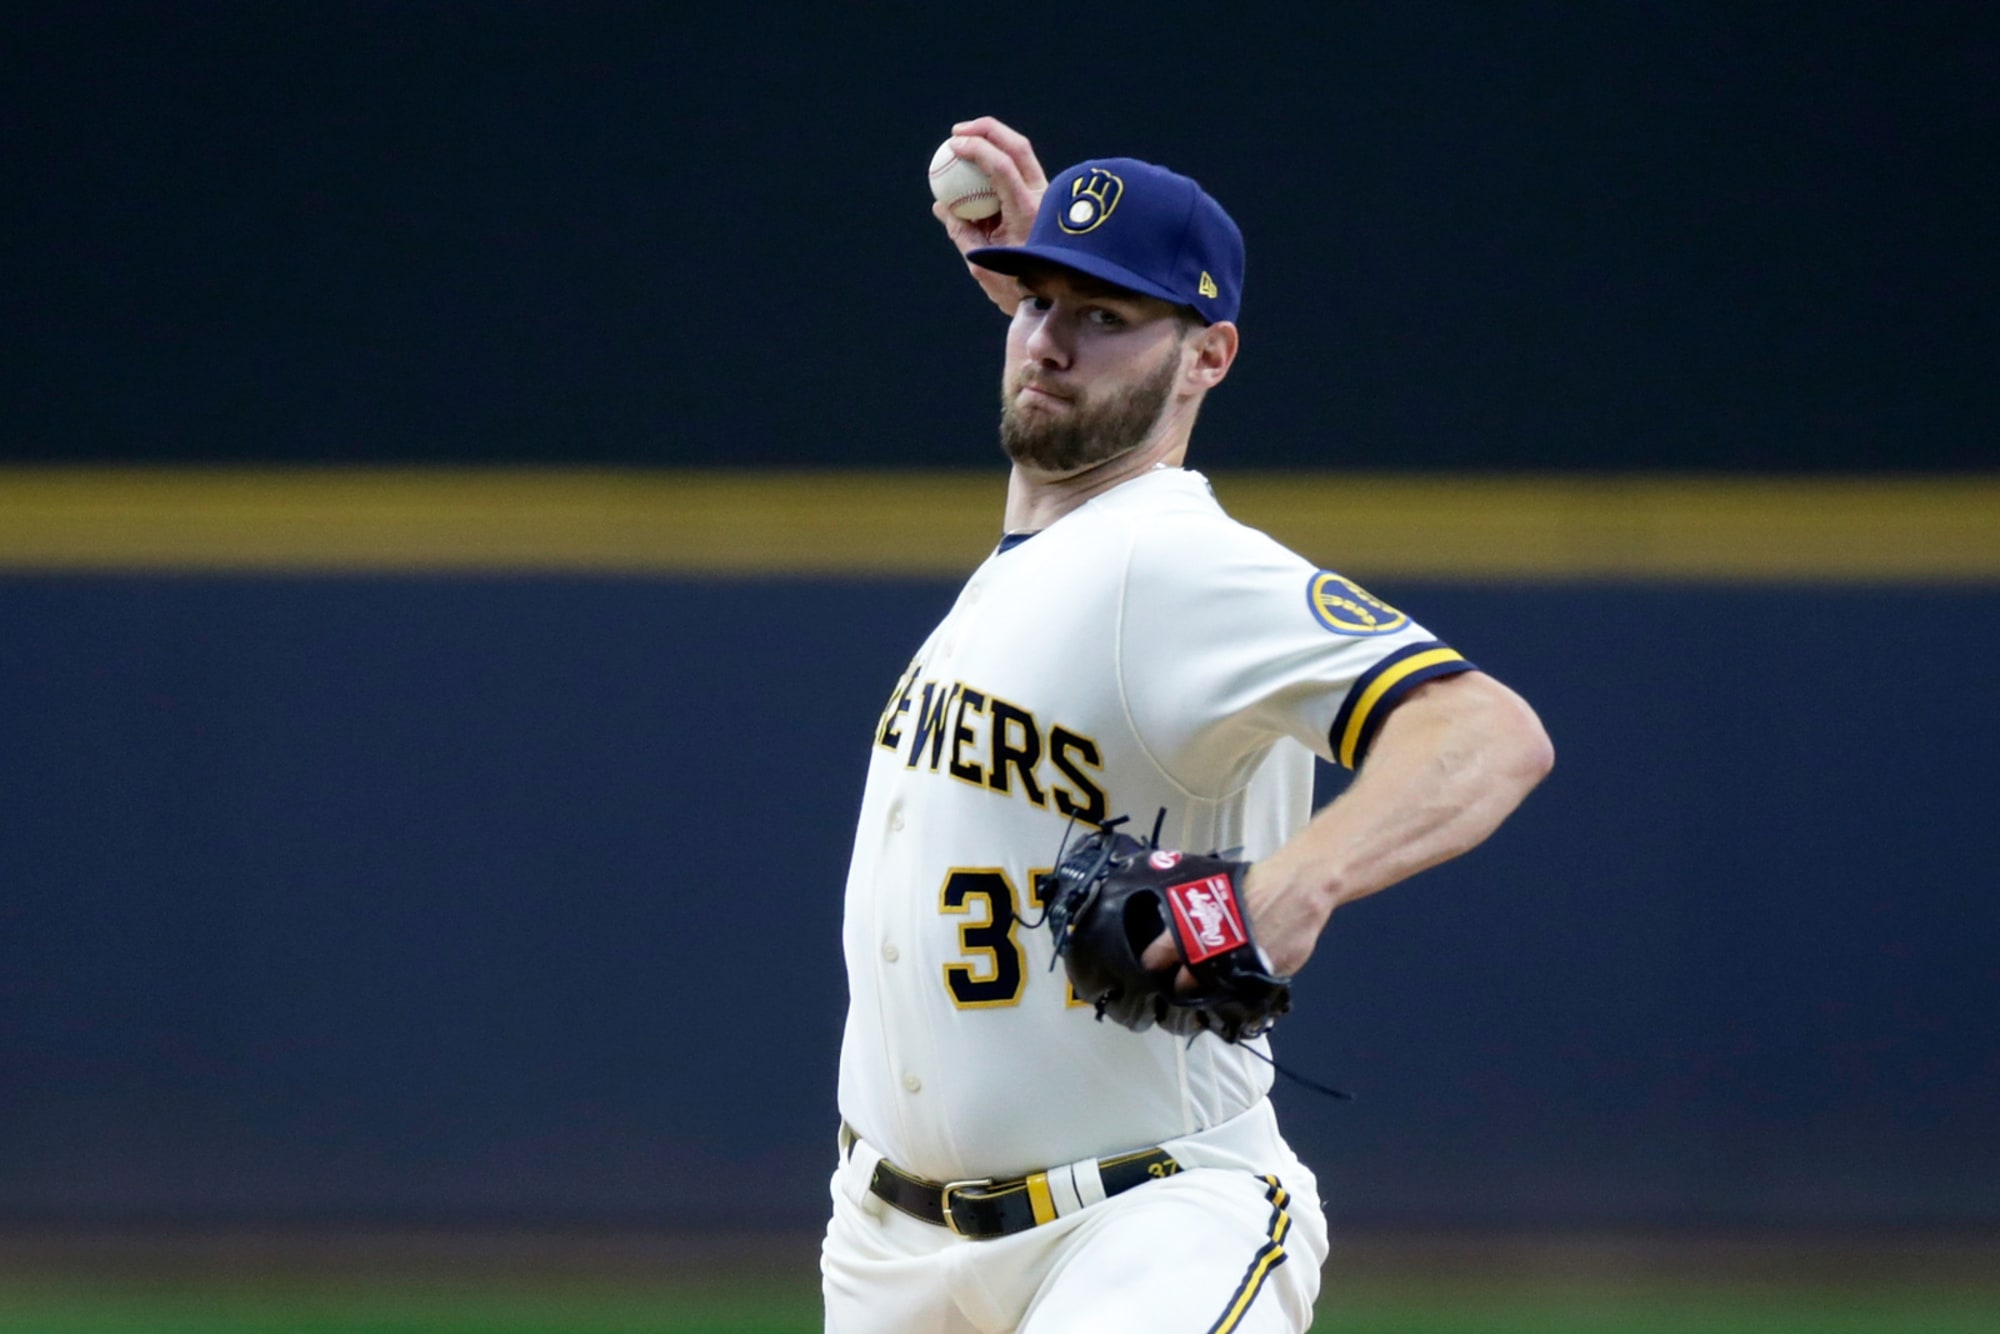 Brewers: What The Rotation Should Look Like When Adrian Houser Returns